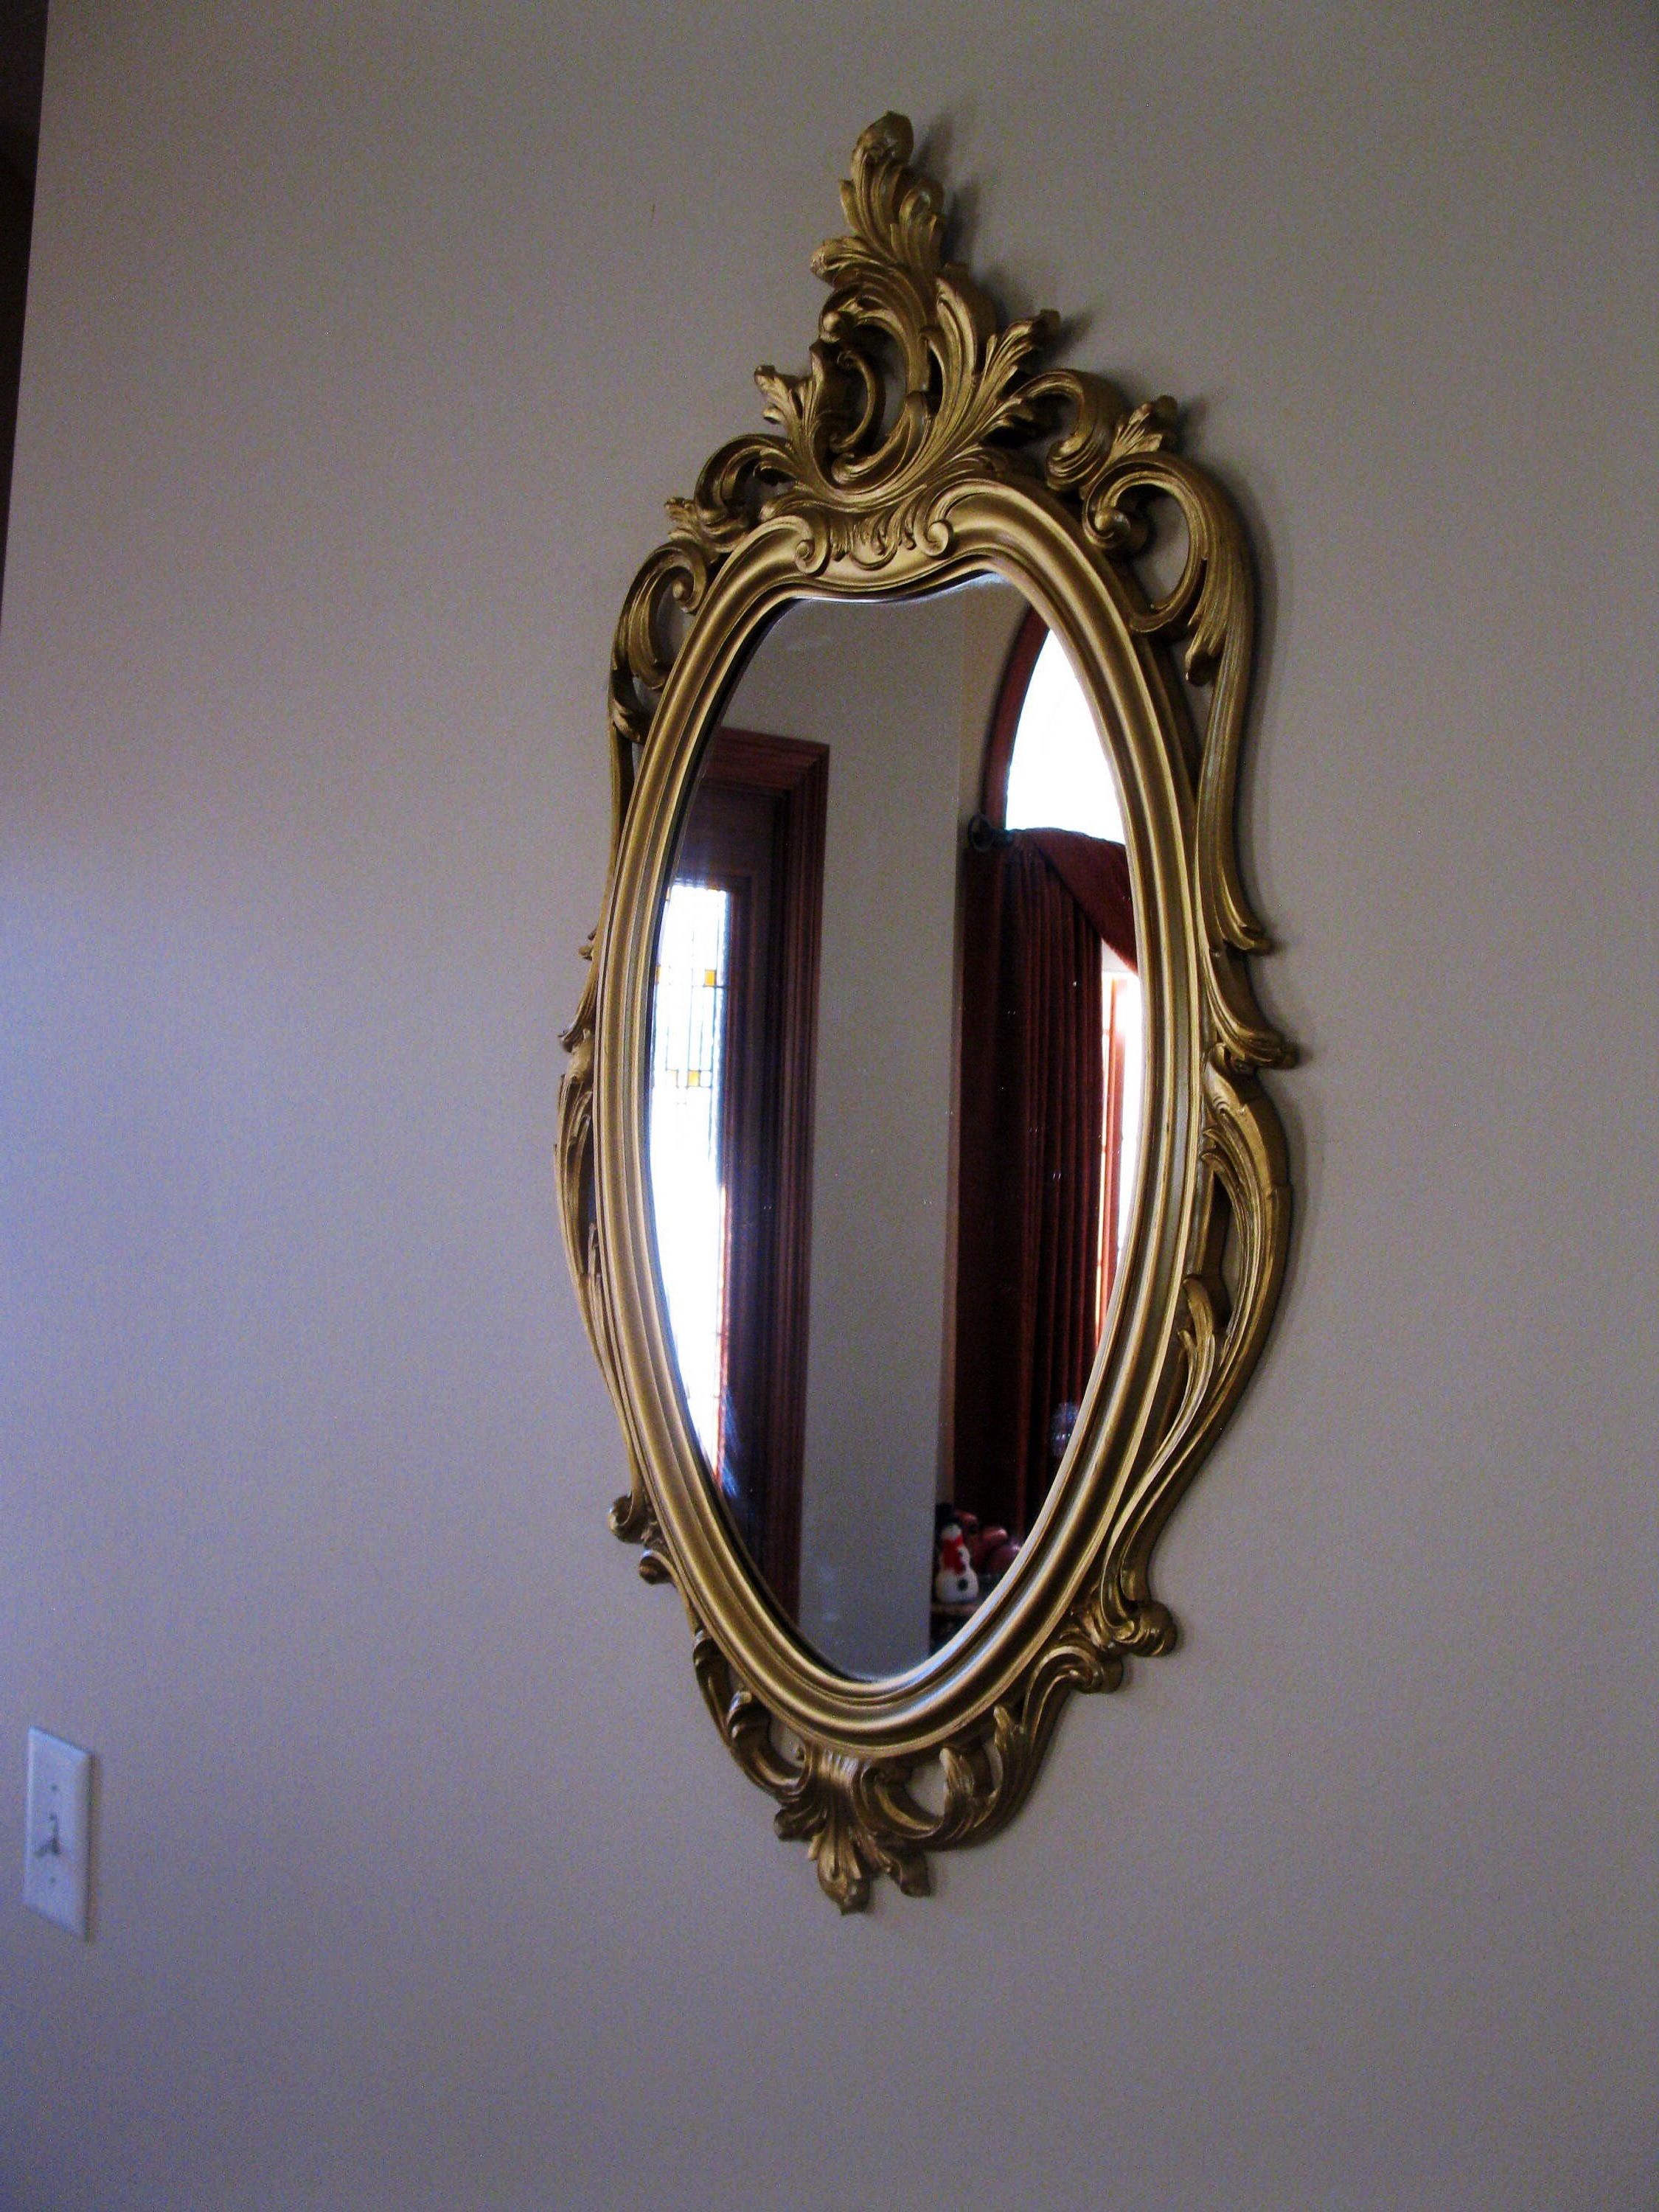 Trendy Large Plastic Wall Mirrors Pertaining To Large Ornate Syroco Wall Mirror  Oval Shape – Plastic Framed (View 19 of 20)